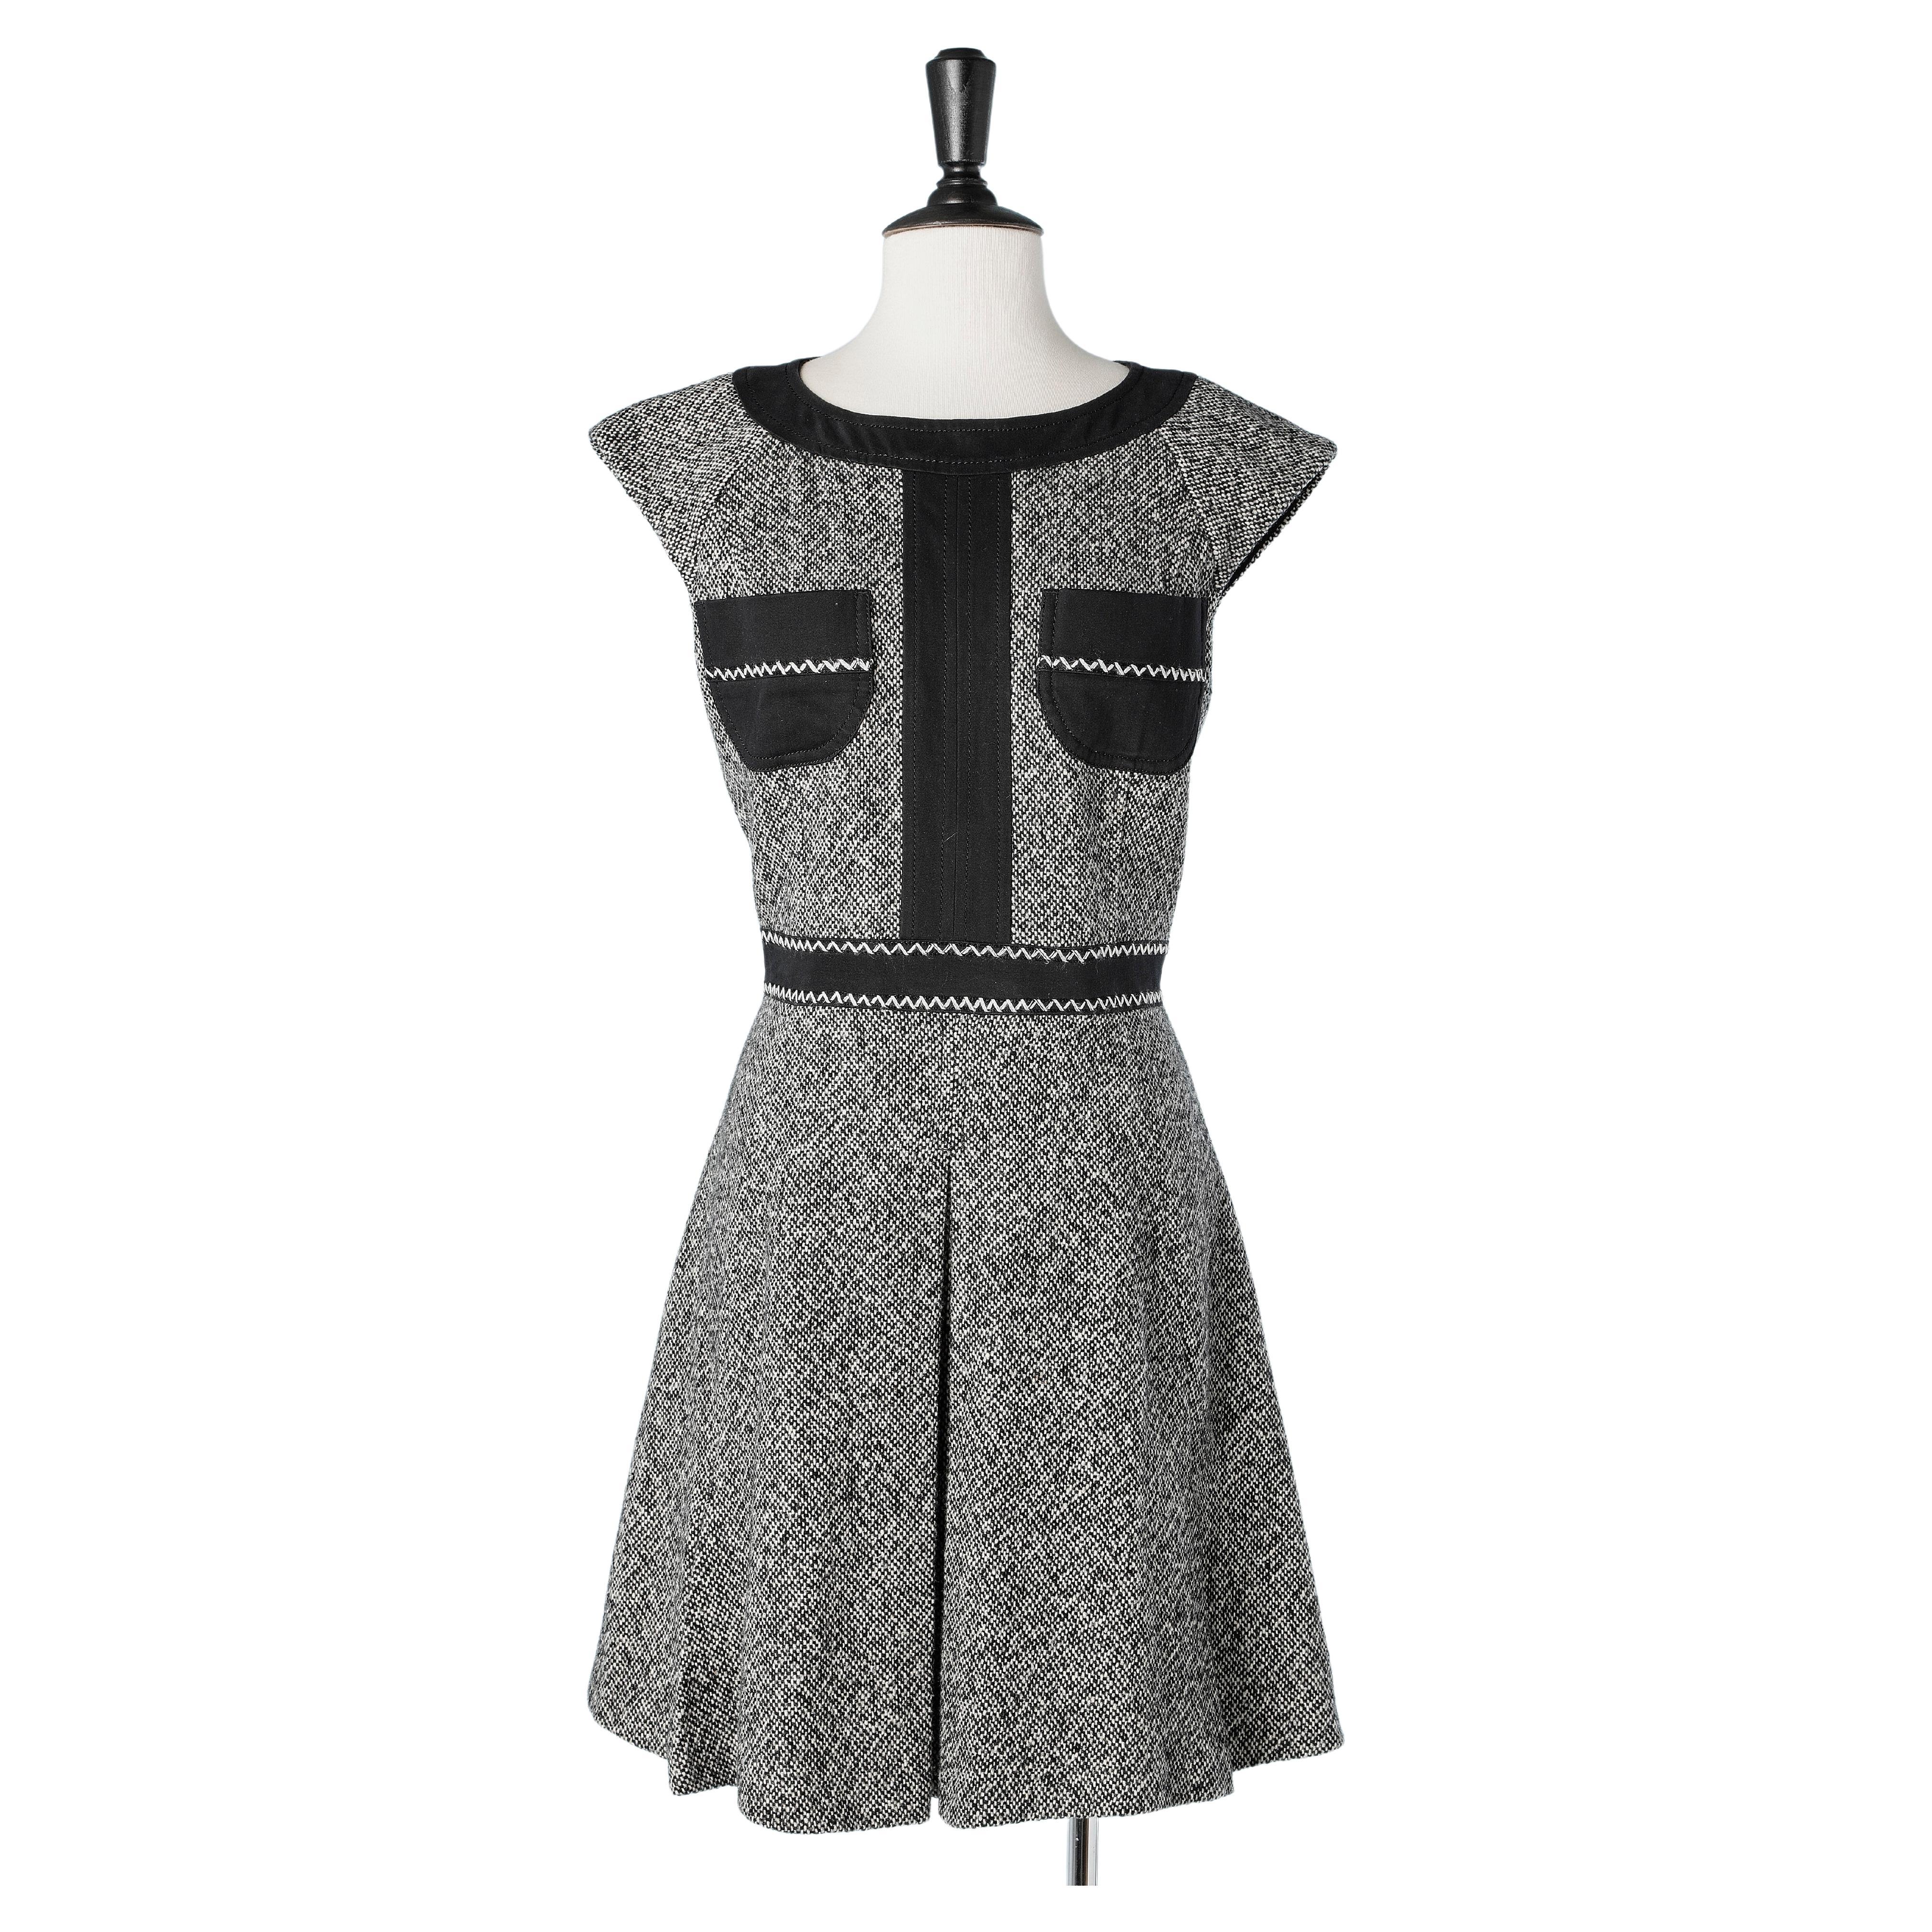 Sleeveless black and white tweed dress with black cotton pockets Versace Jeans 